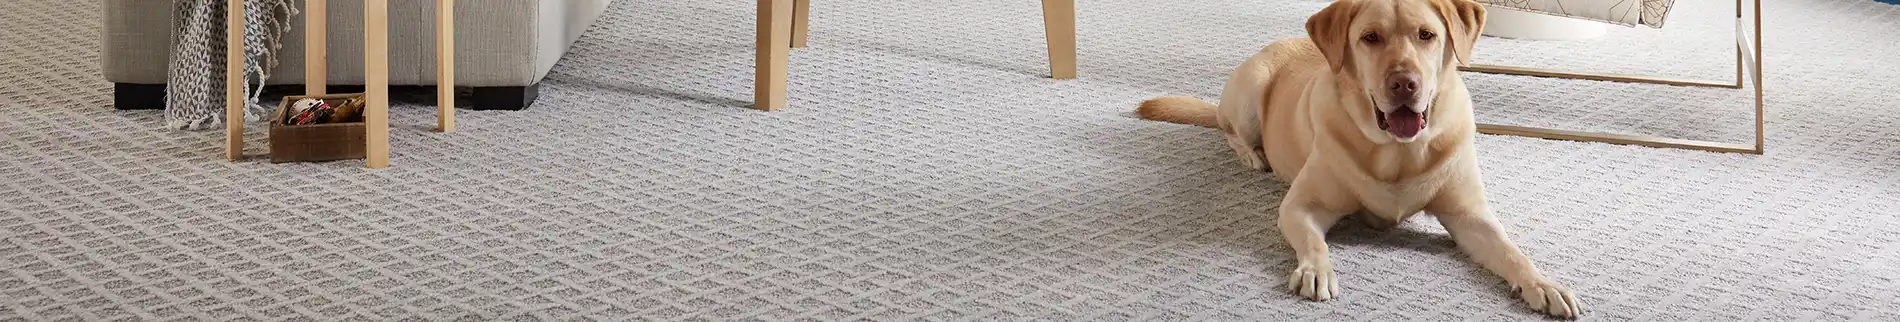 pet-friendly flooring with dog